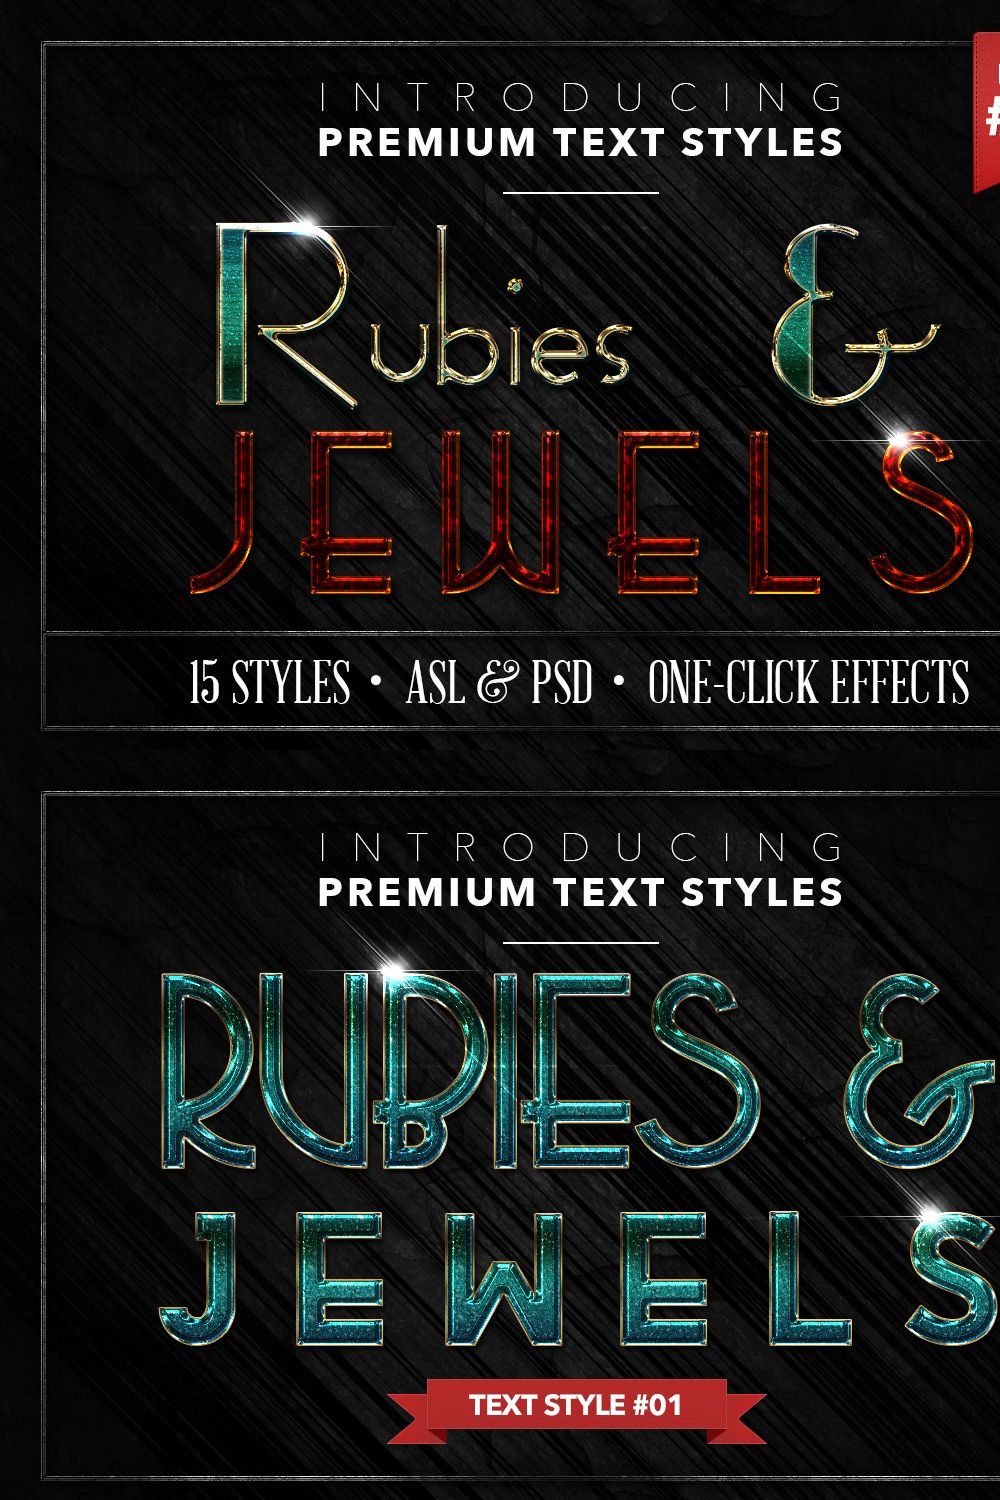 Rubies & Jewels #2 - 15 Text Styles pinterest preview image.